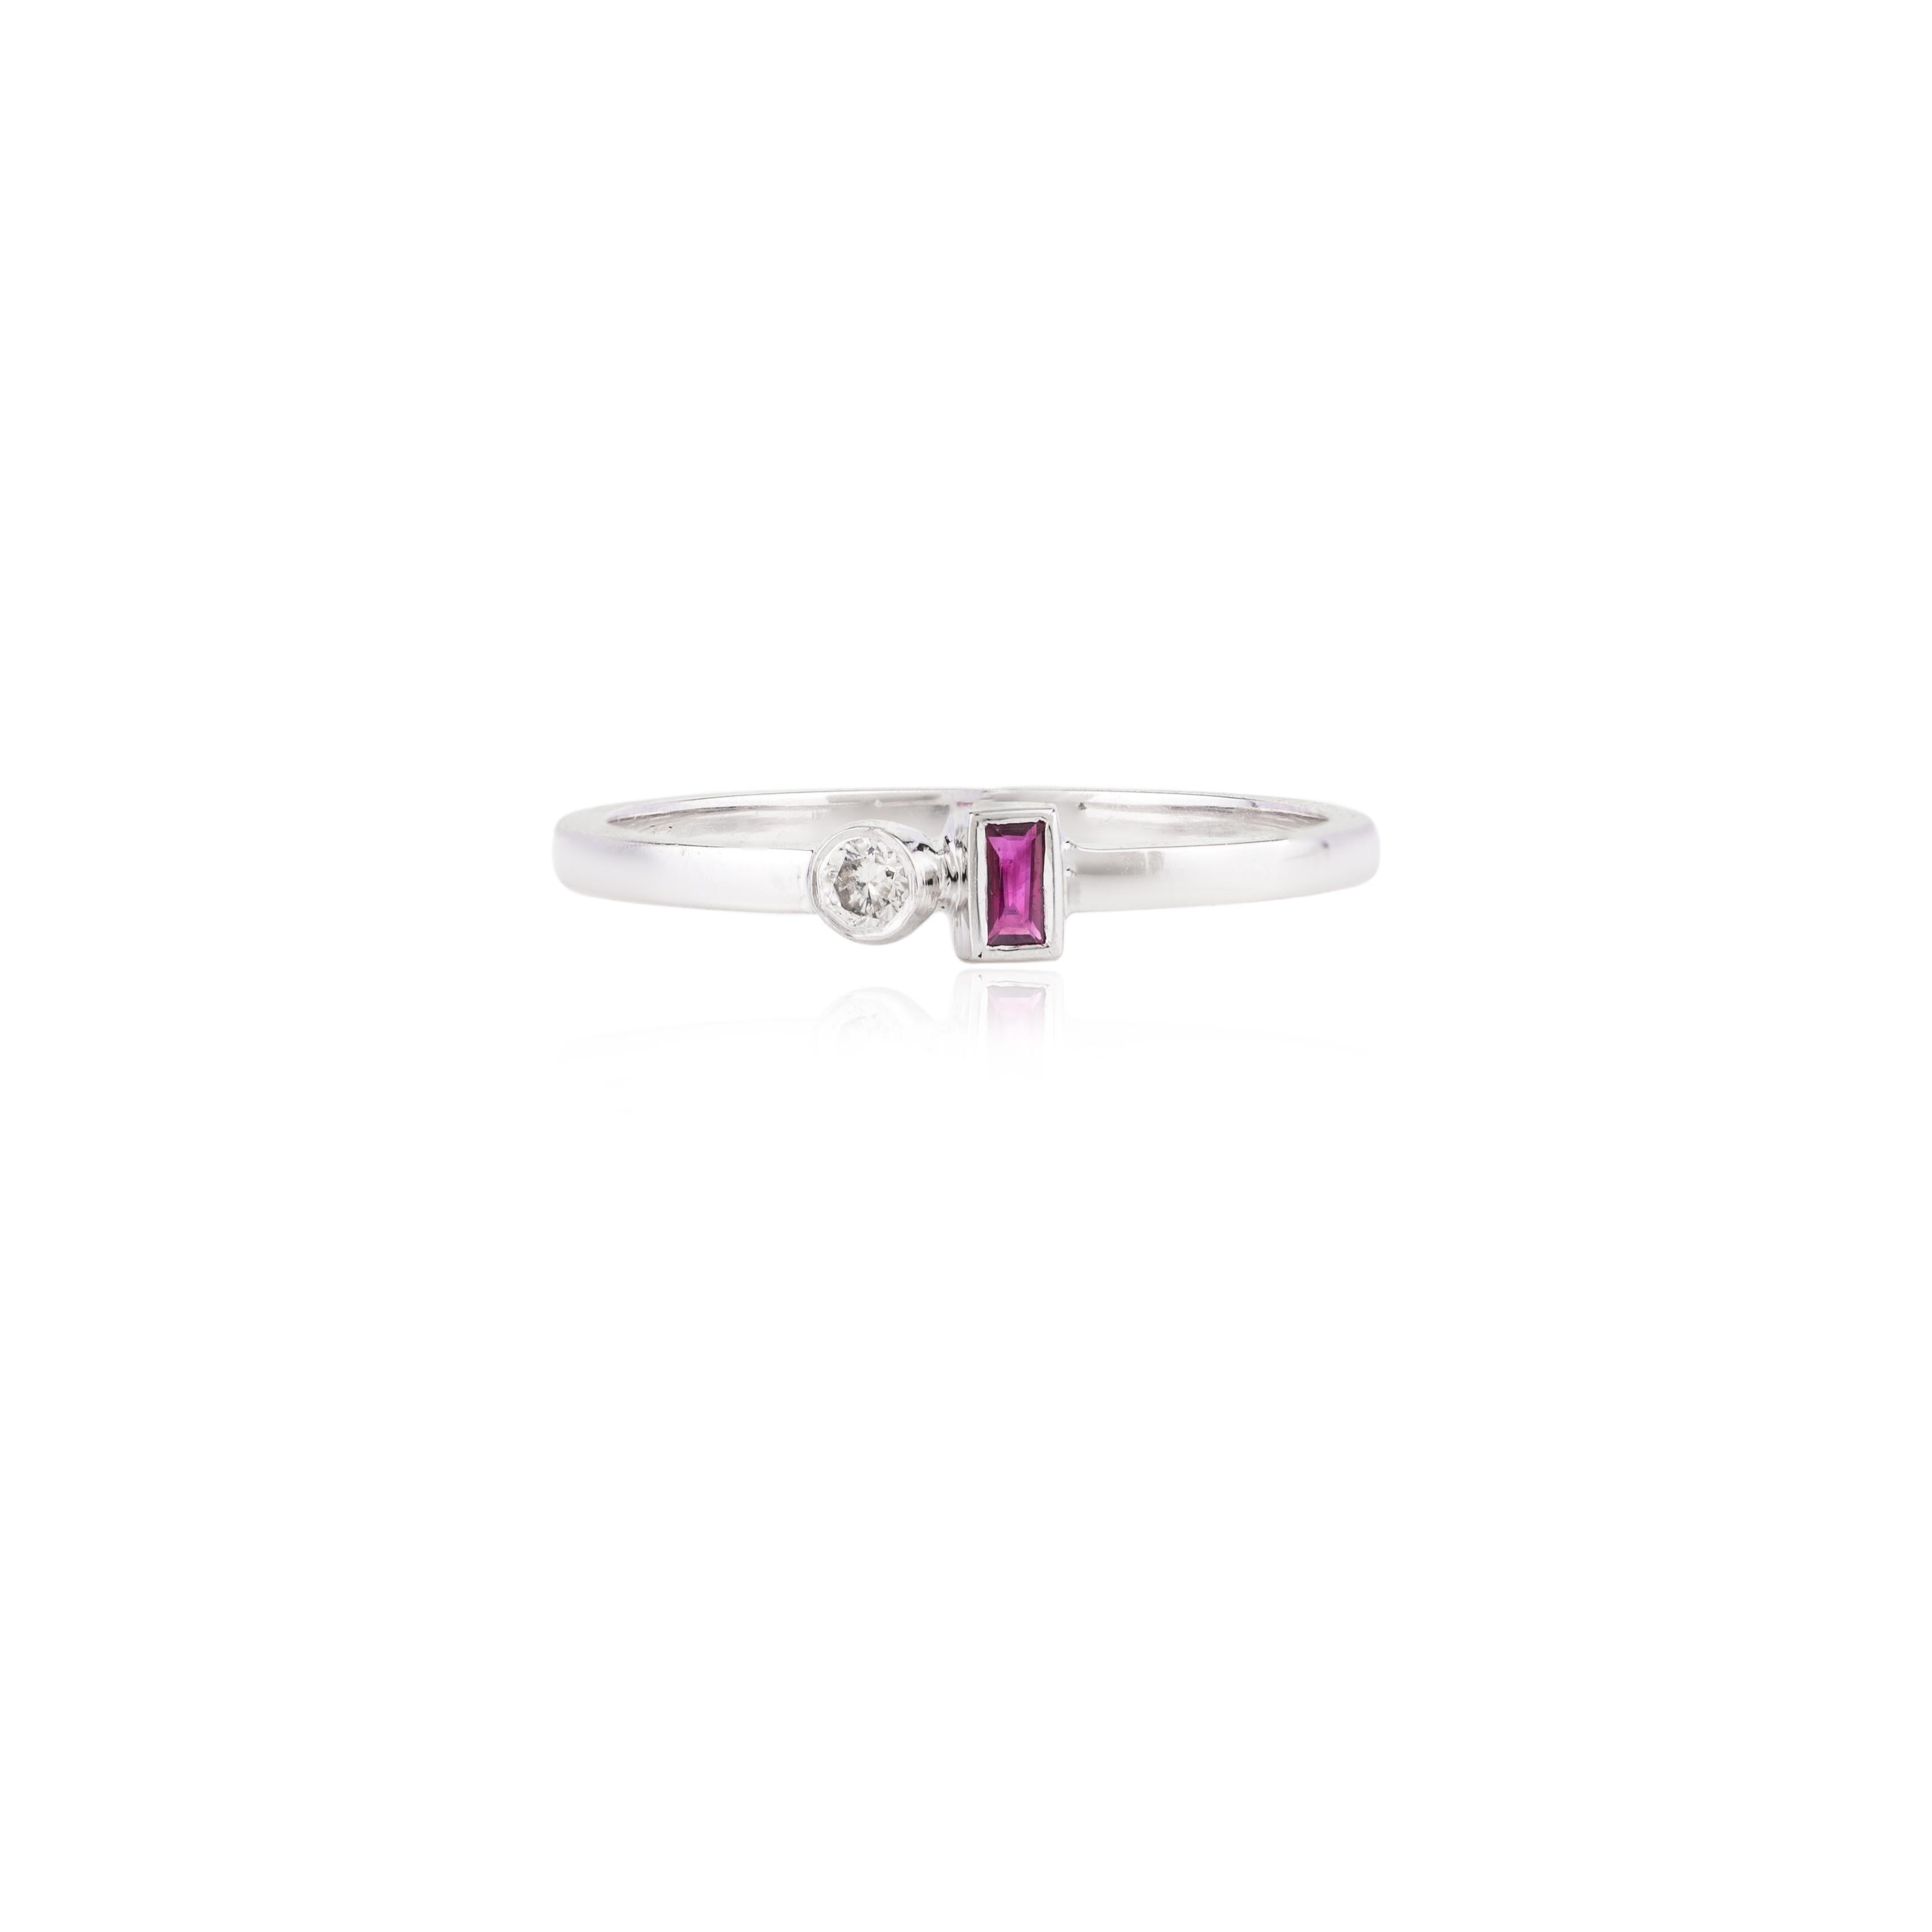 For Sale:  Modern Two Stone Ruby and Diamond Ring Gift in 14k White Gold 3